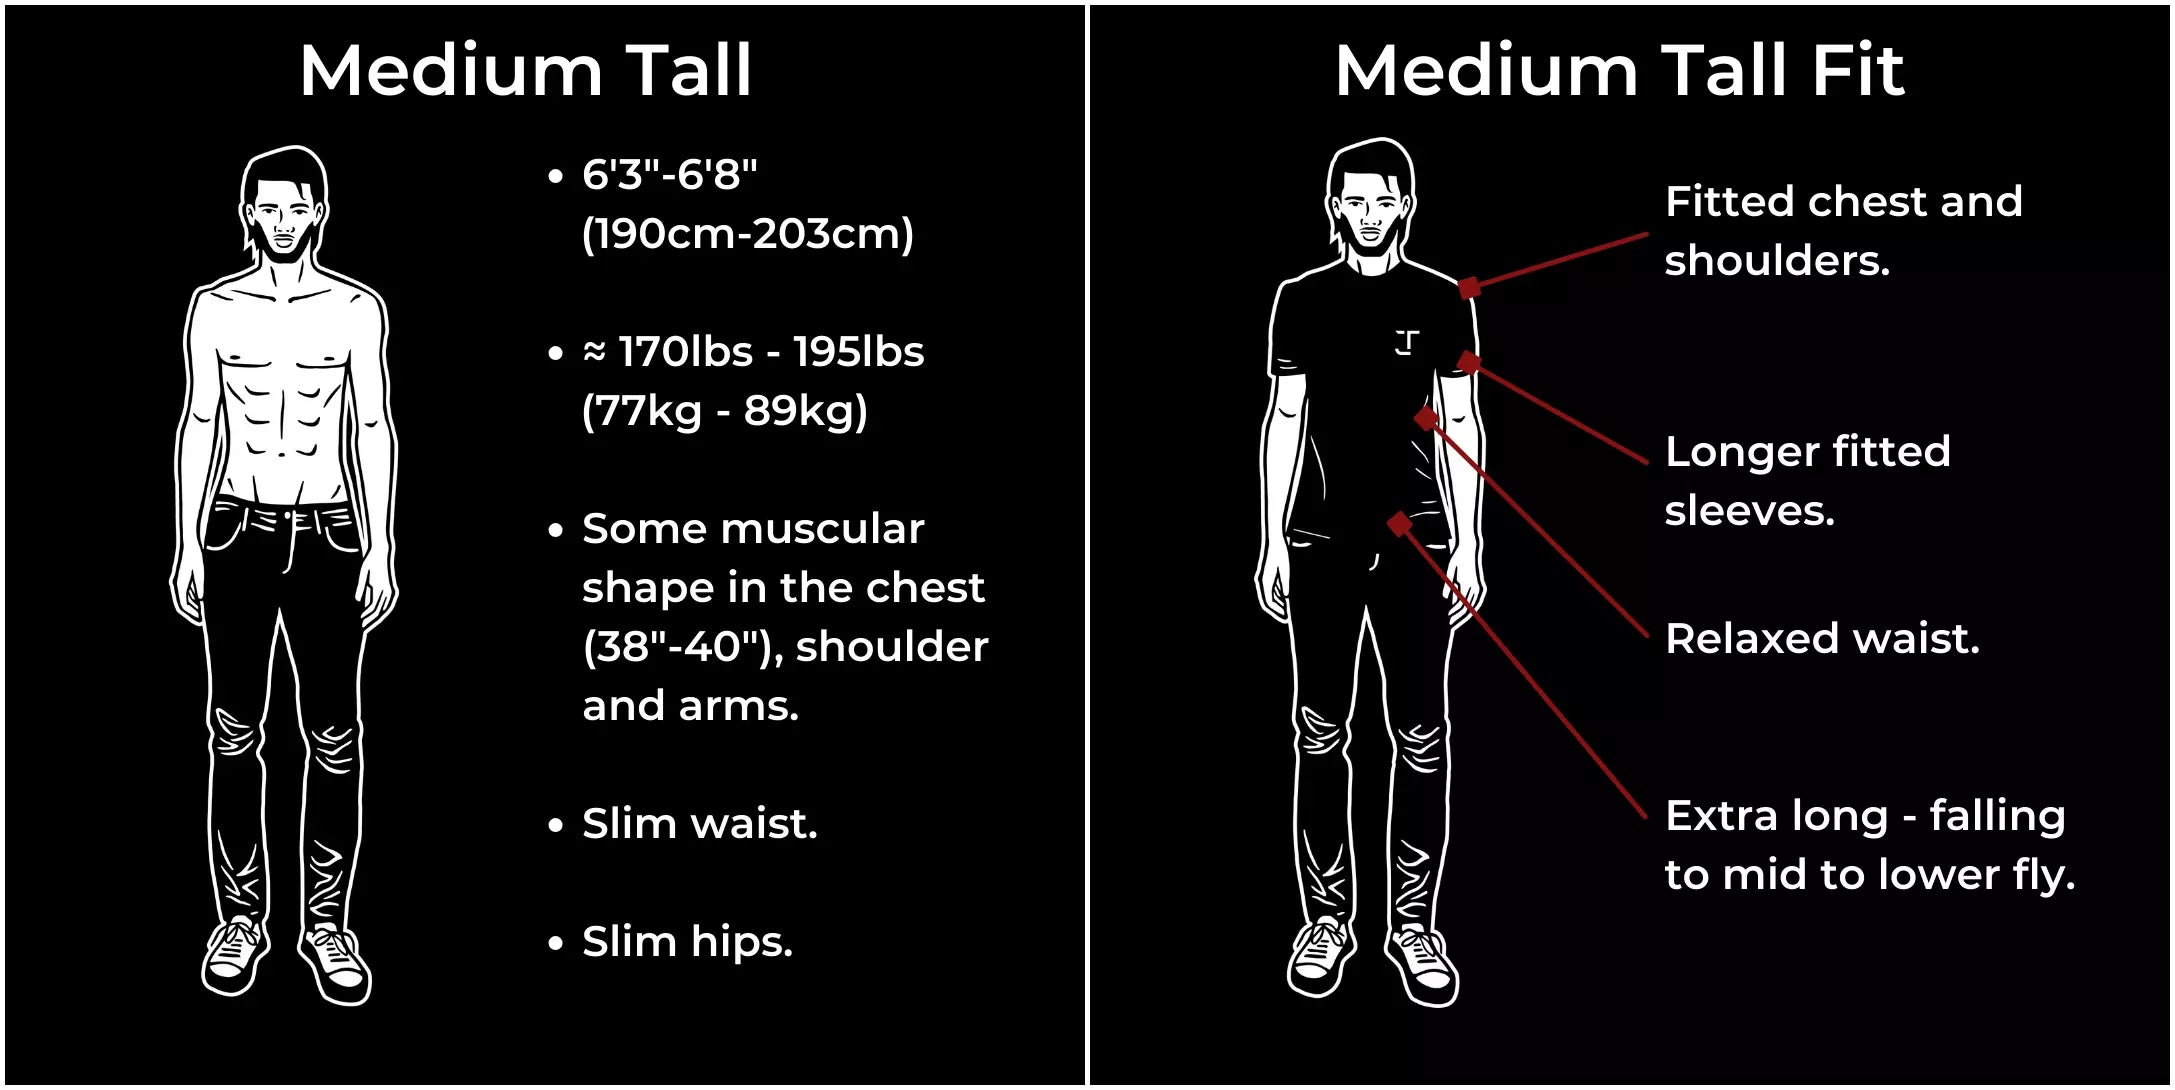 Medium tall for tall and slim guys 170-195lbs and 6'3